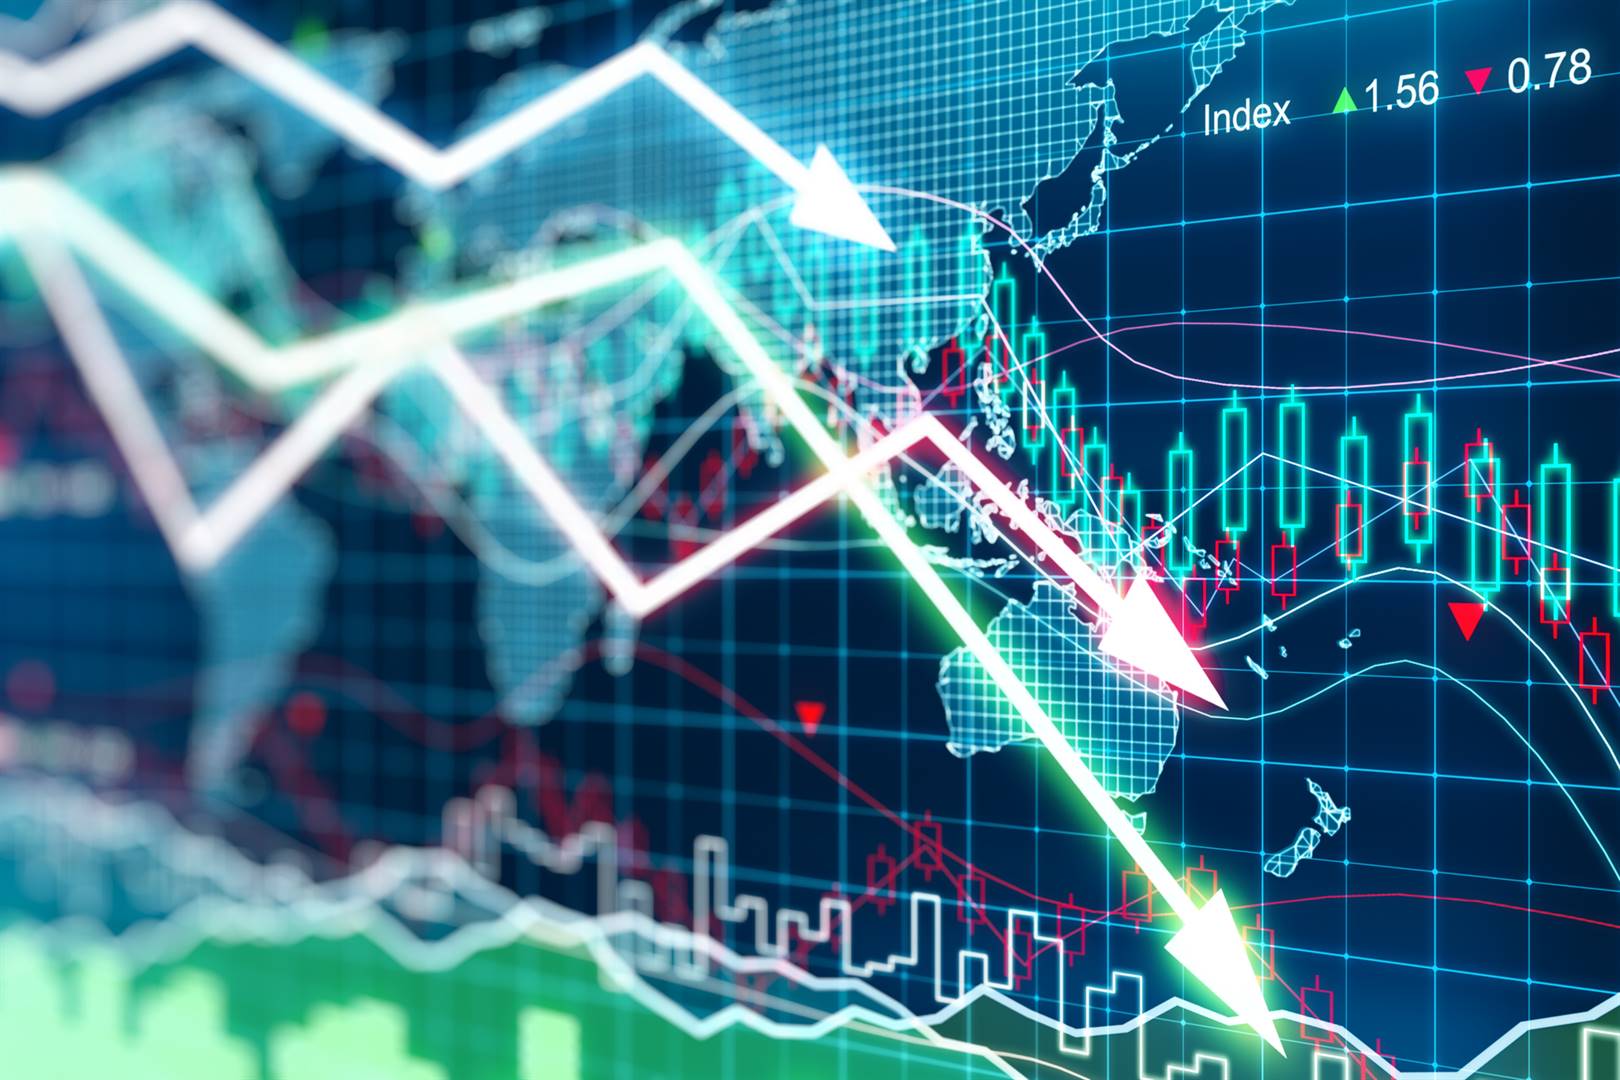 A cooling of the global economy has also been projected for this year. Photo: iStock